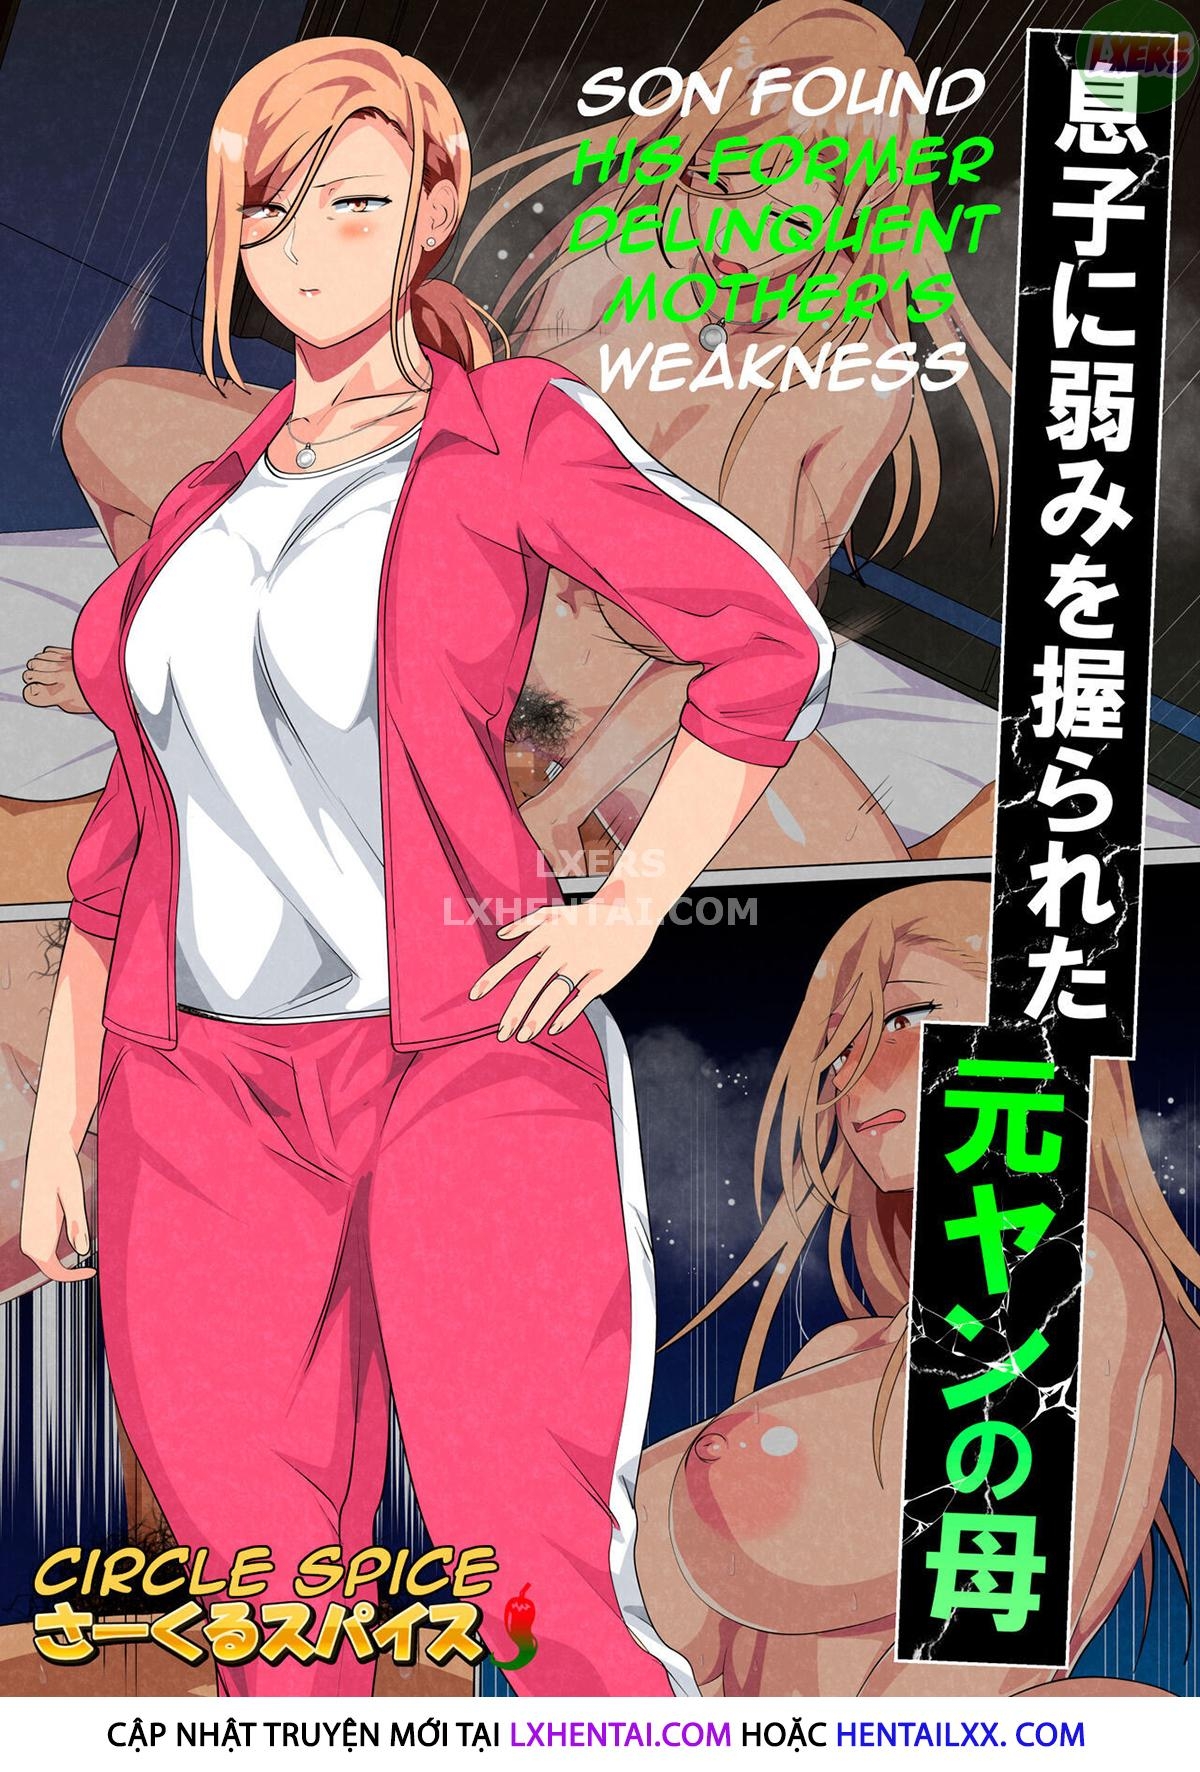 Xem ảnh Son Found His Former Delinquent Mother's Weakness - Chapter 3 - 1651233105455_0 - Hentai24h.Tv